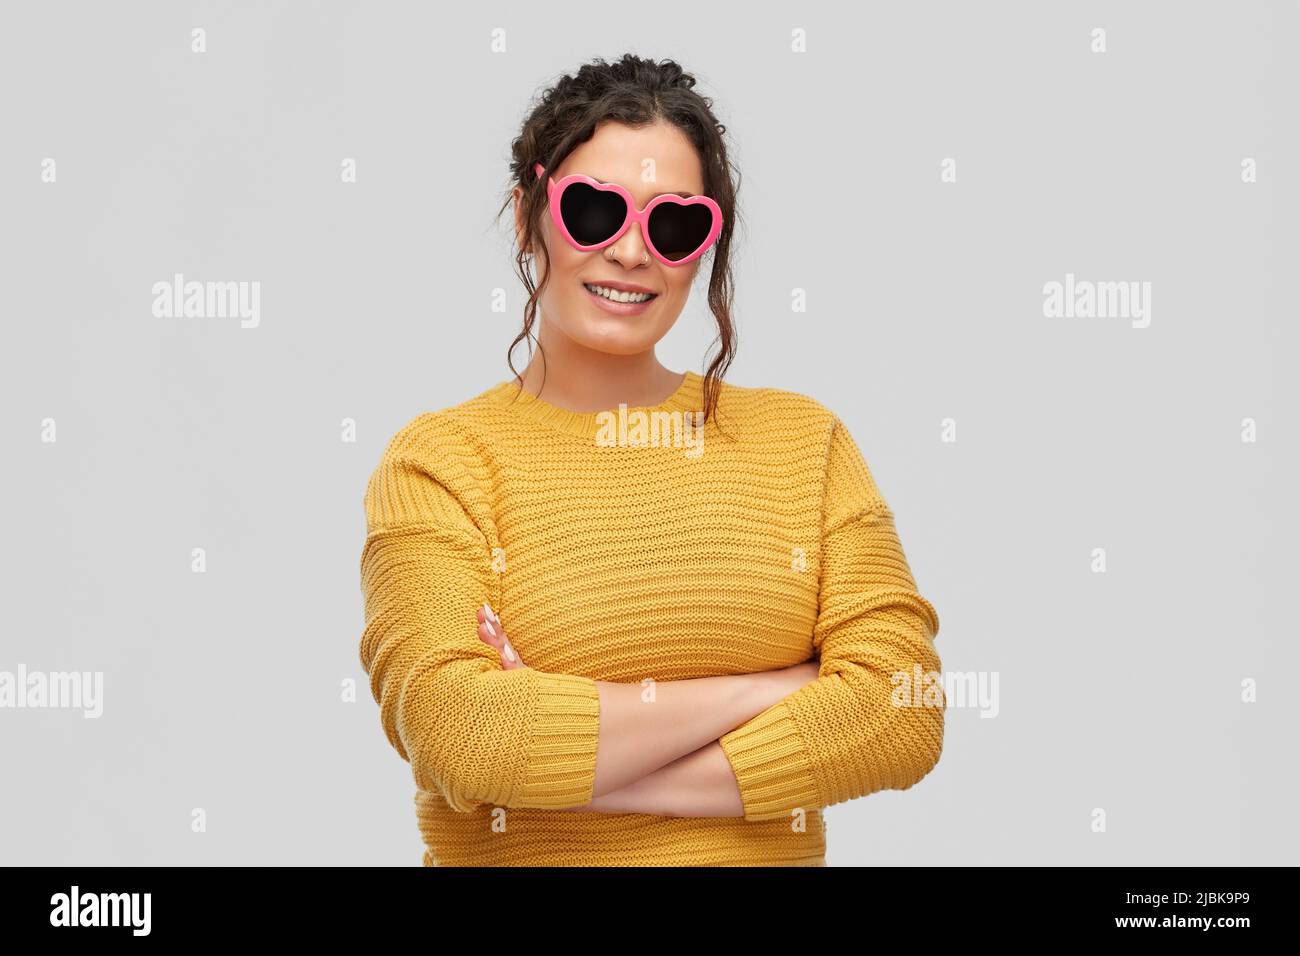 smiling young woman in heart-shaped sunglasses Stock Photo